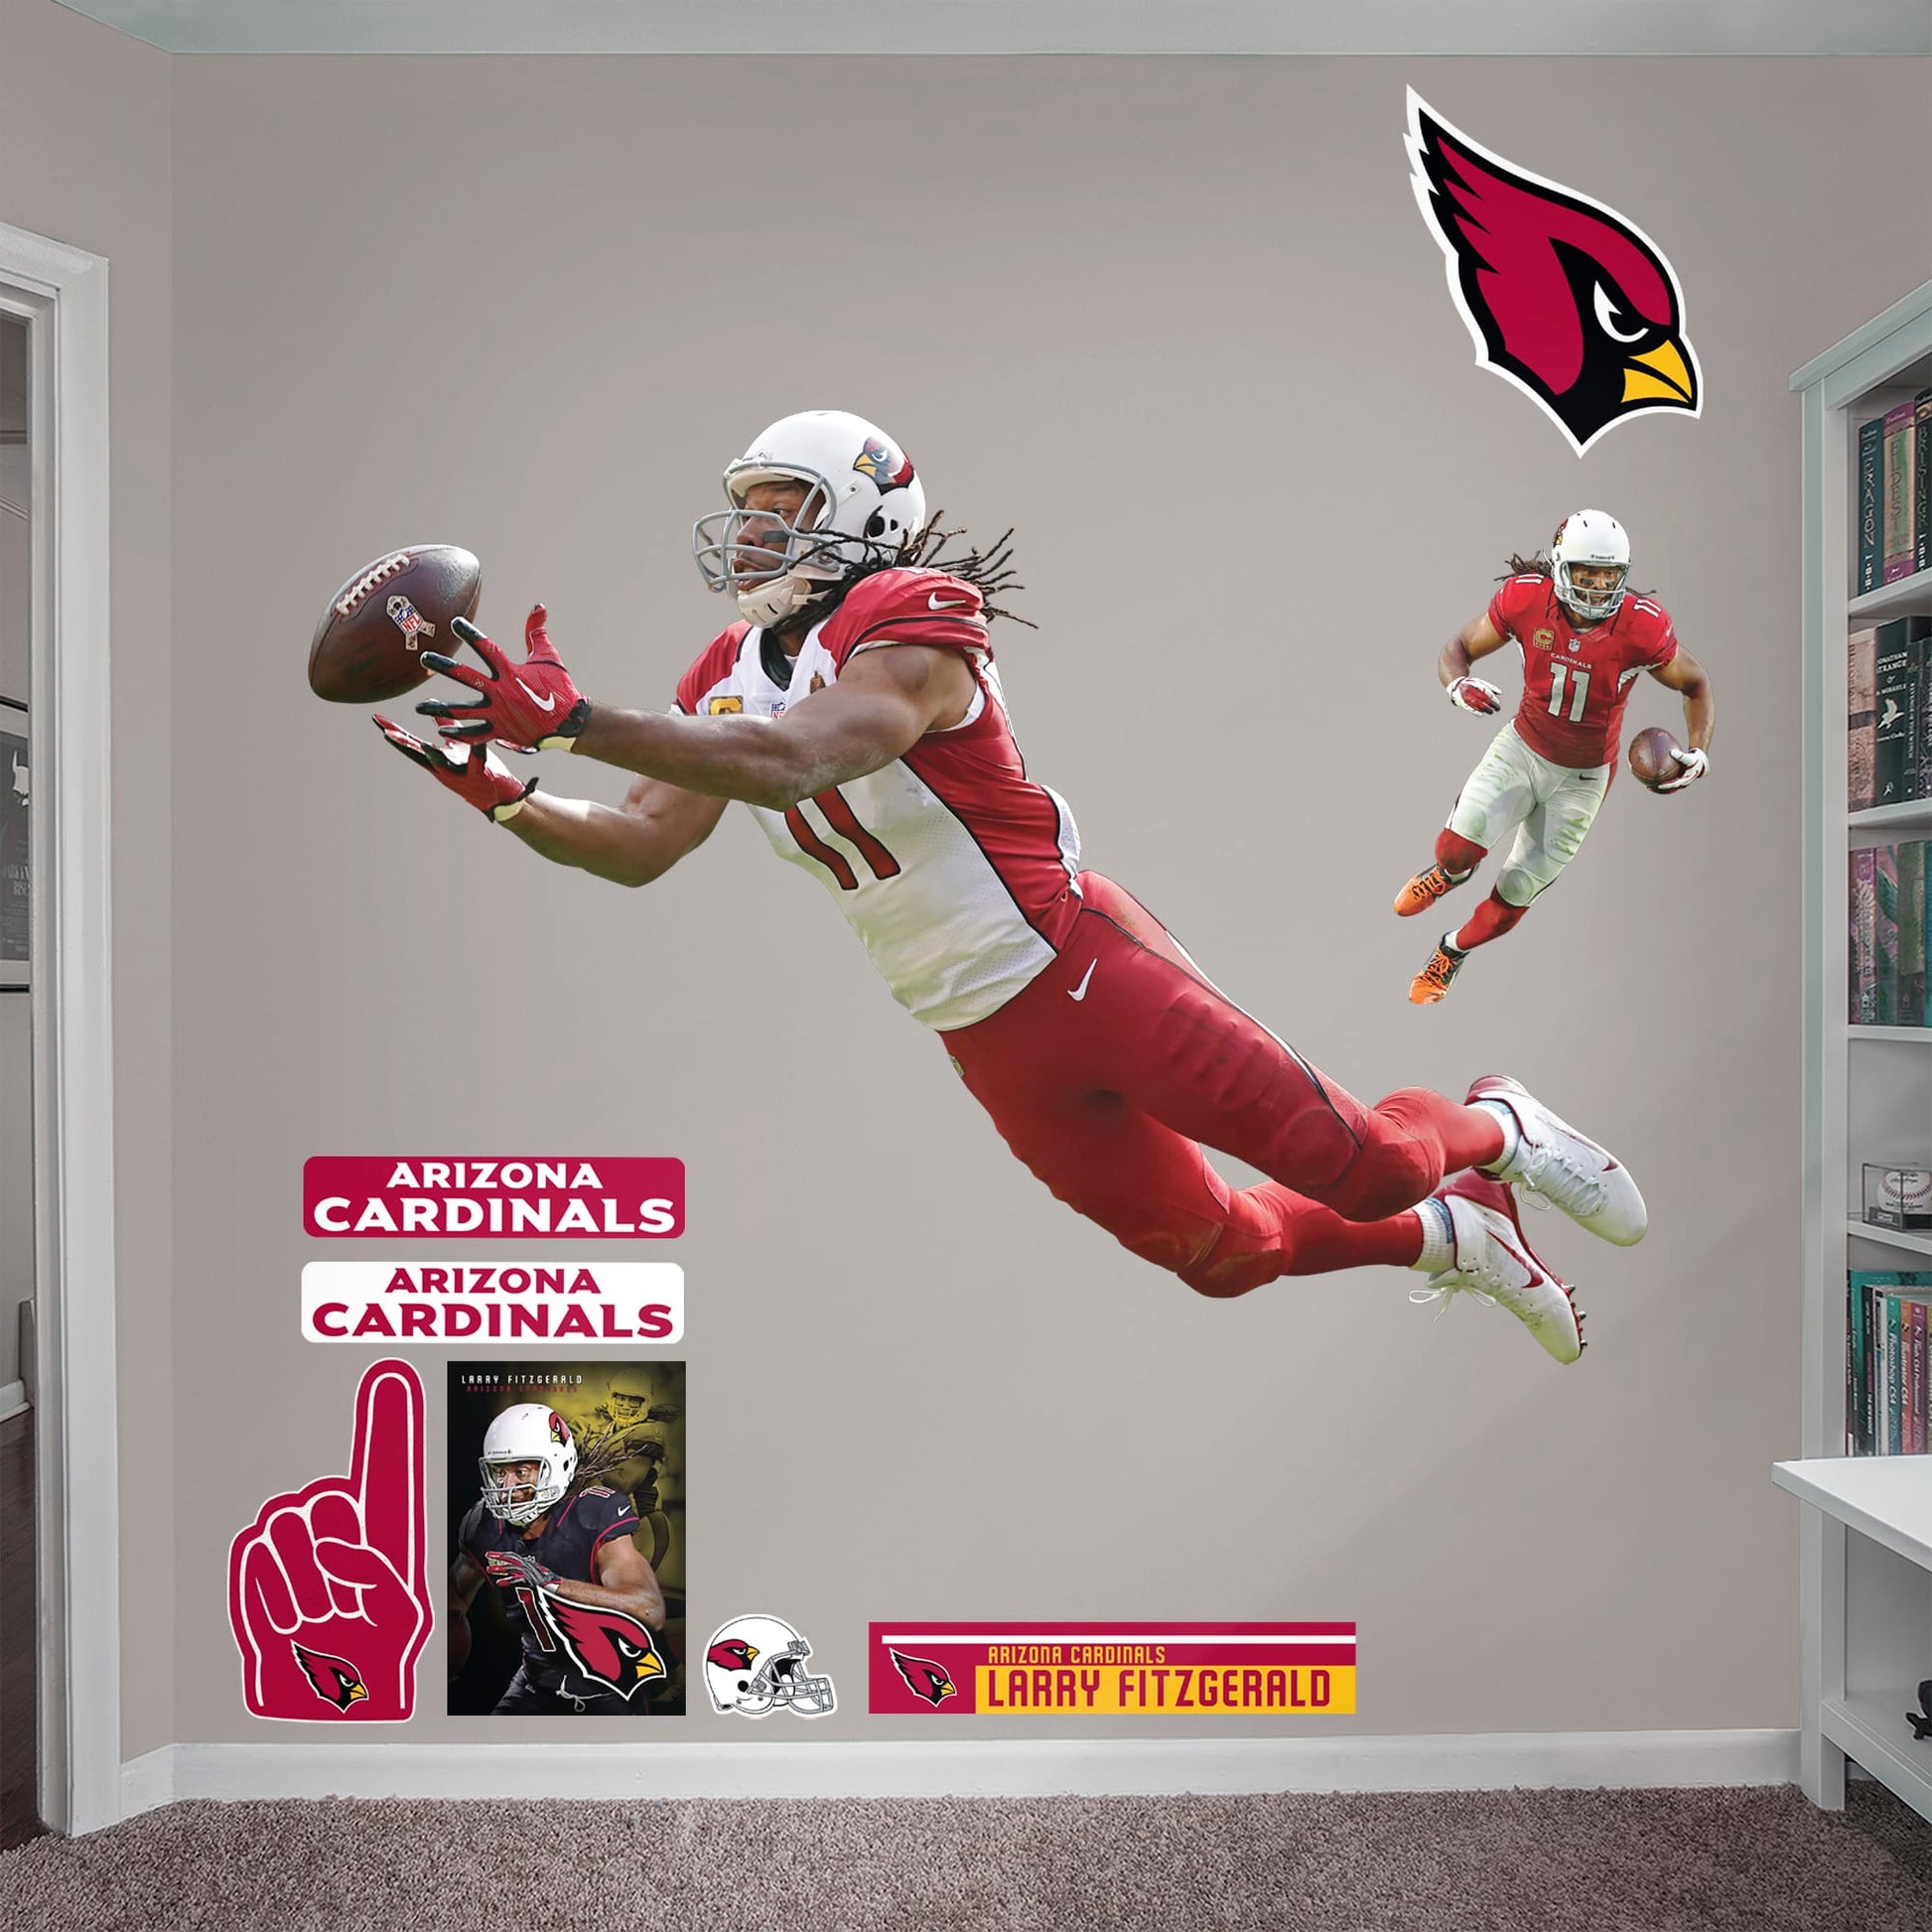 A Cardinals cover photo inspired by superheroes